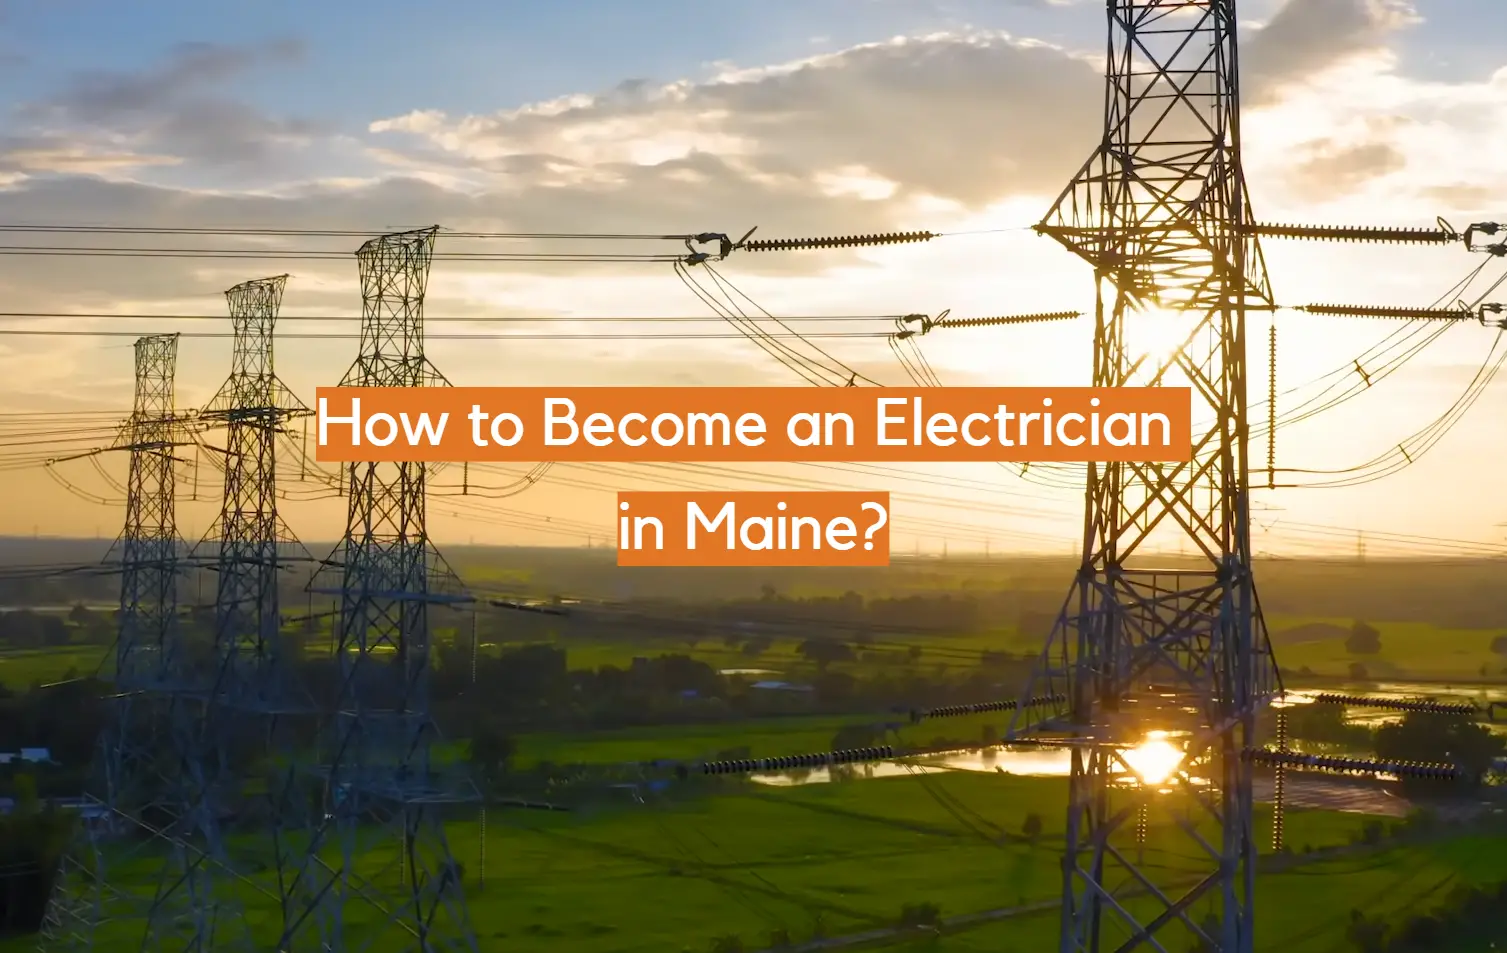 How to Become an Electrician in Maine?